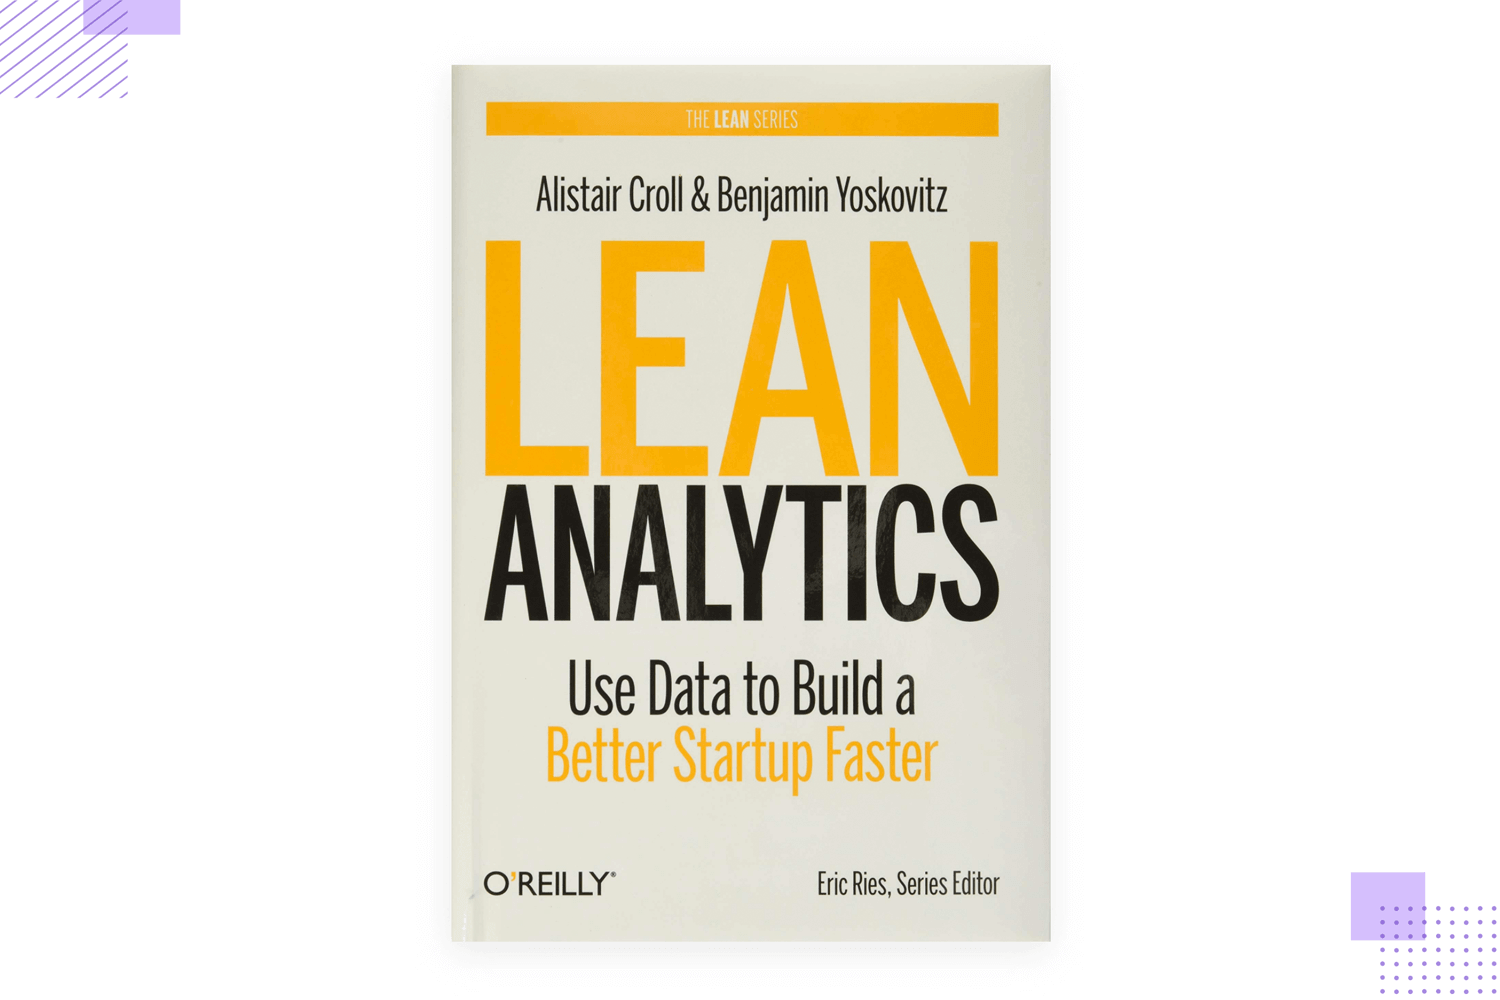 Lean analytics book by Alistair Croll